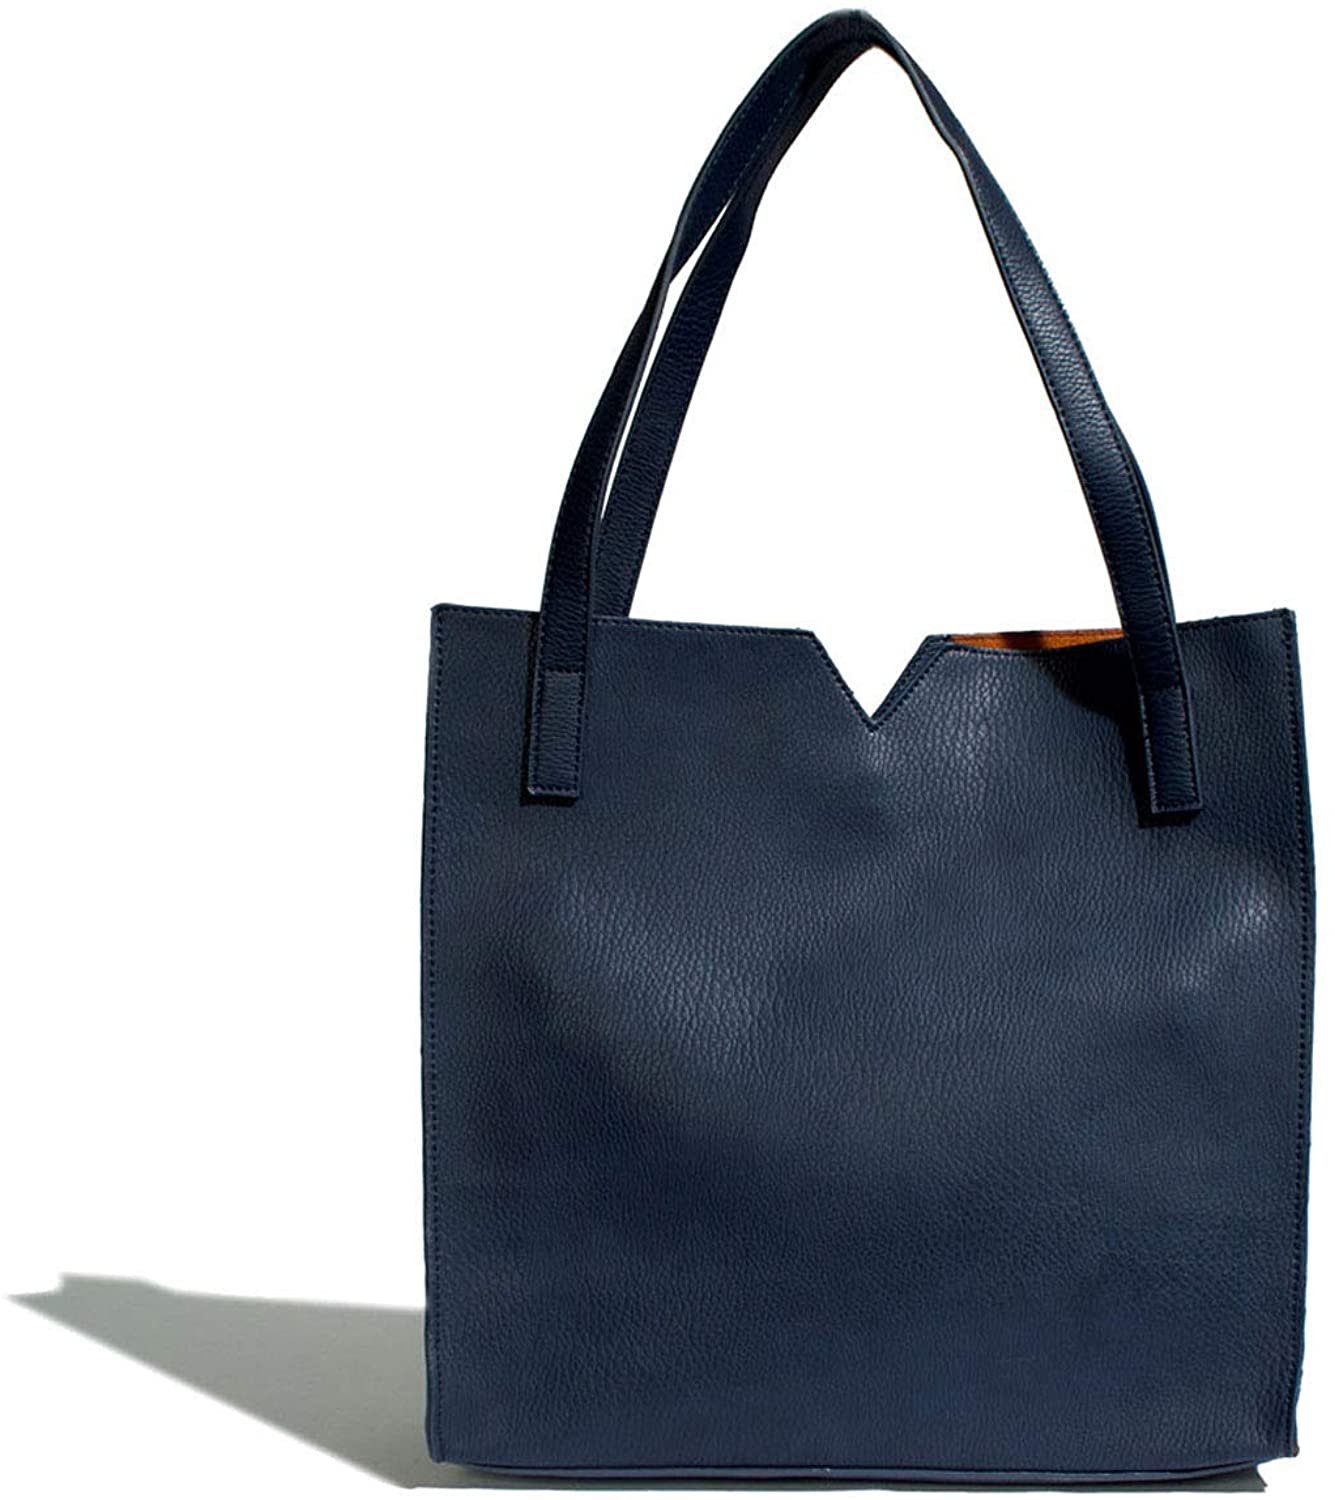 Price:$59.95    Pixie Mood Alicia Lightweight Vegan Leather Tote -With Crossbody Bag  Clothing